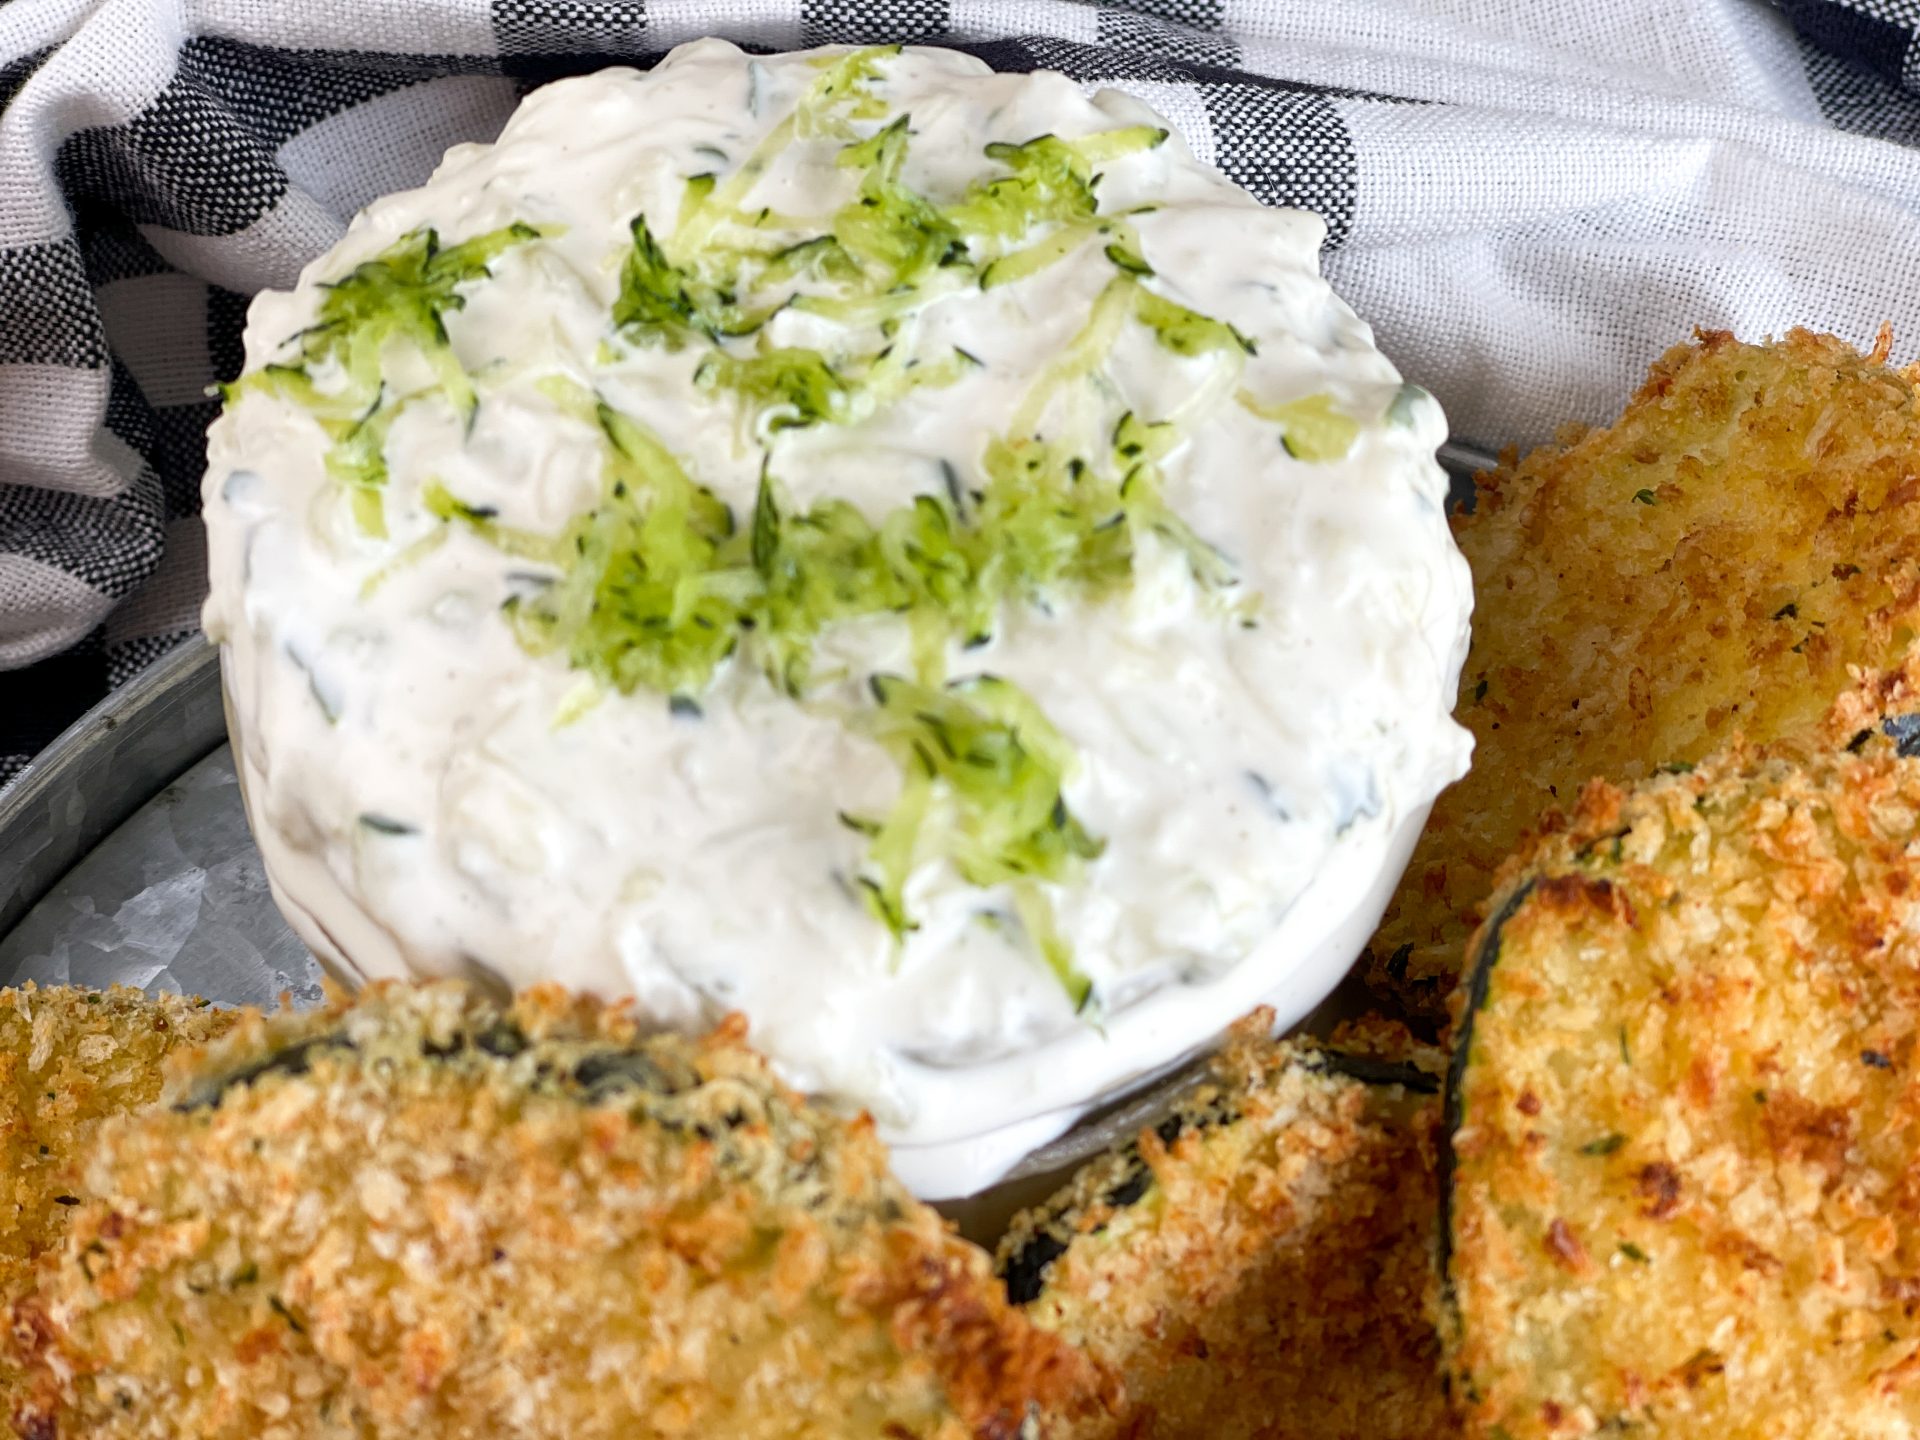 Creamy Cucumber Dip from Farmwife Feeds. A cream dip made with fresh grated cucumbers great for dipping all the things. #cucumber #dips #garden